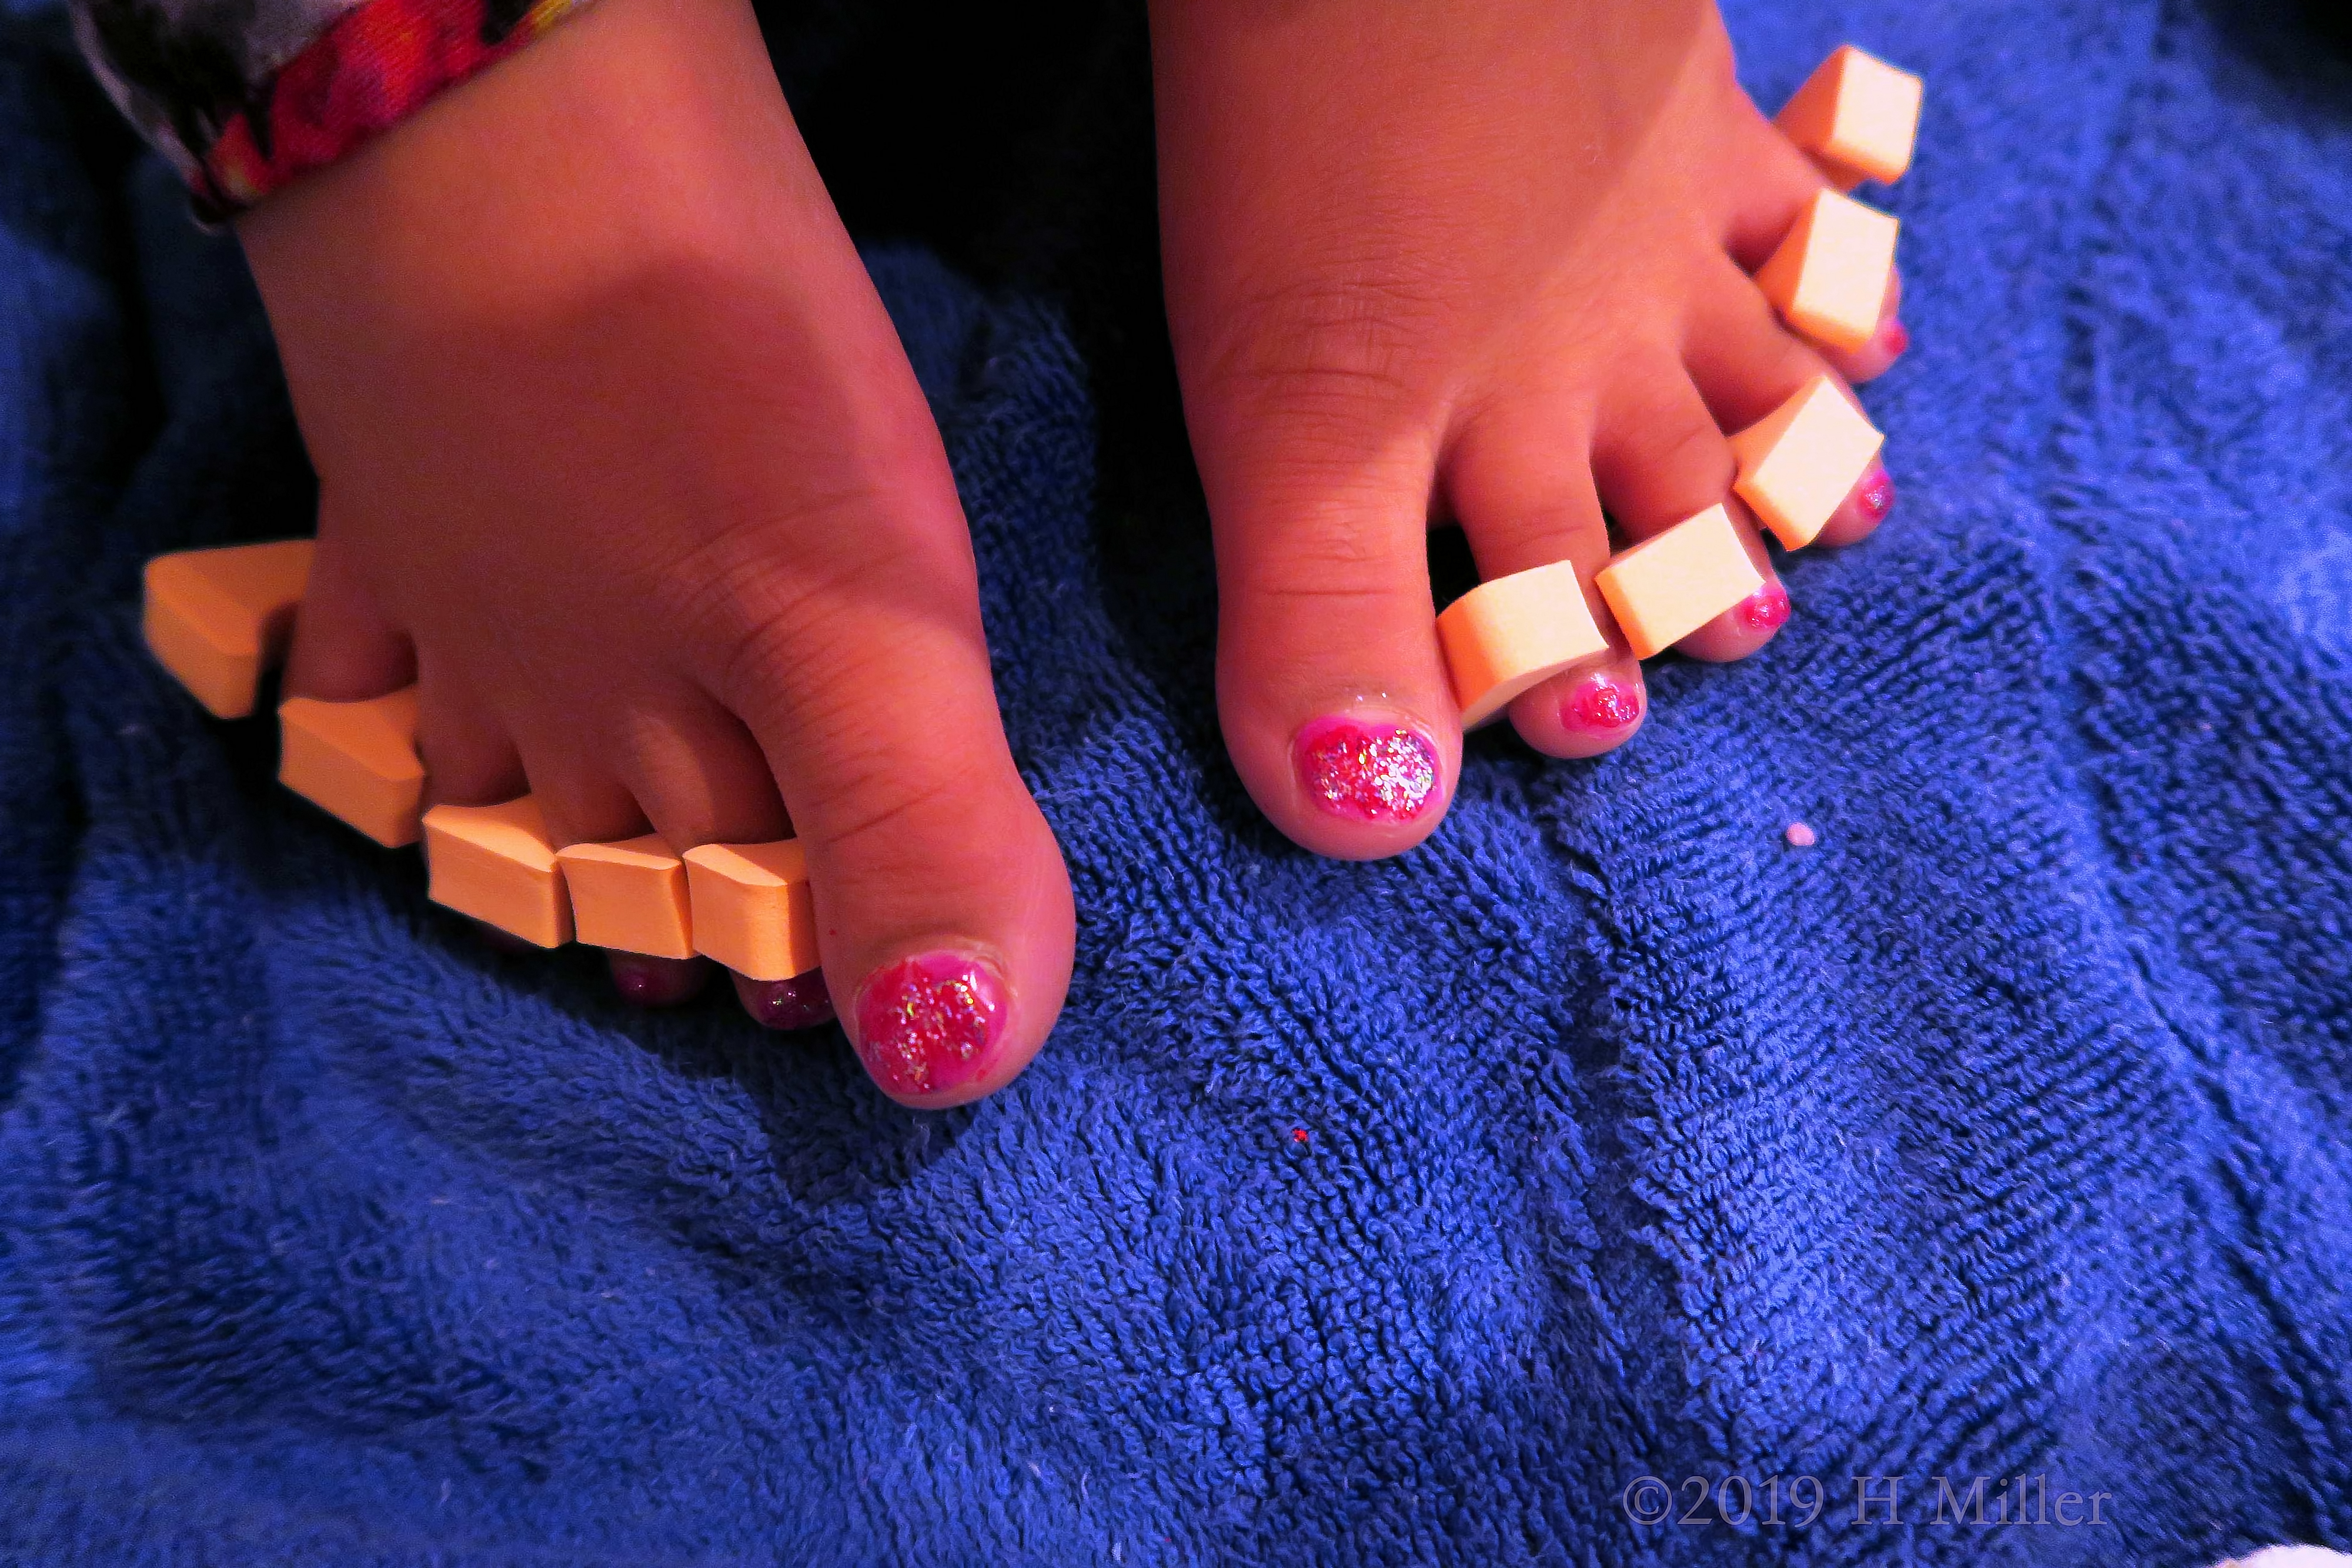 Pink Pedis! Kids Pedi On Party Guest Left To Dry! 4